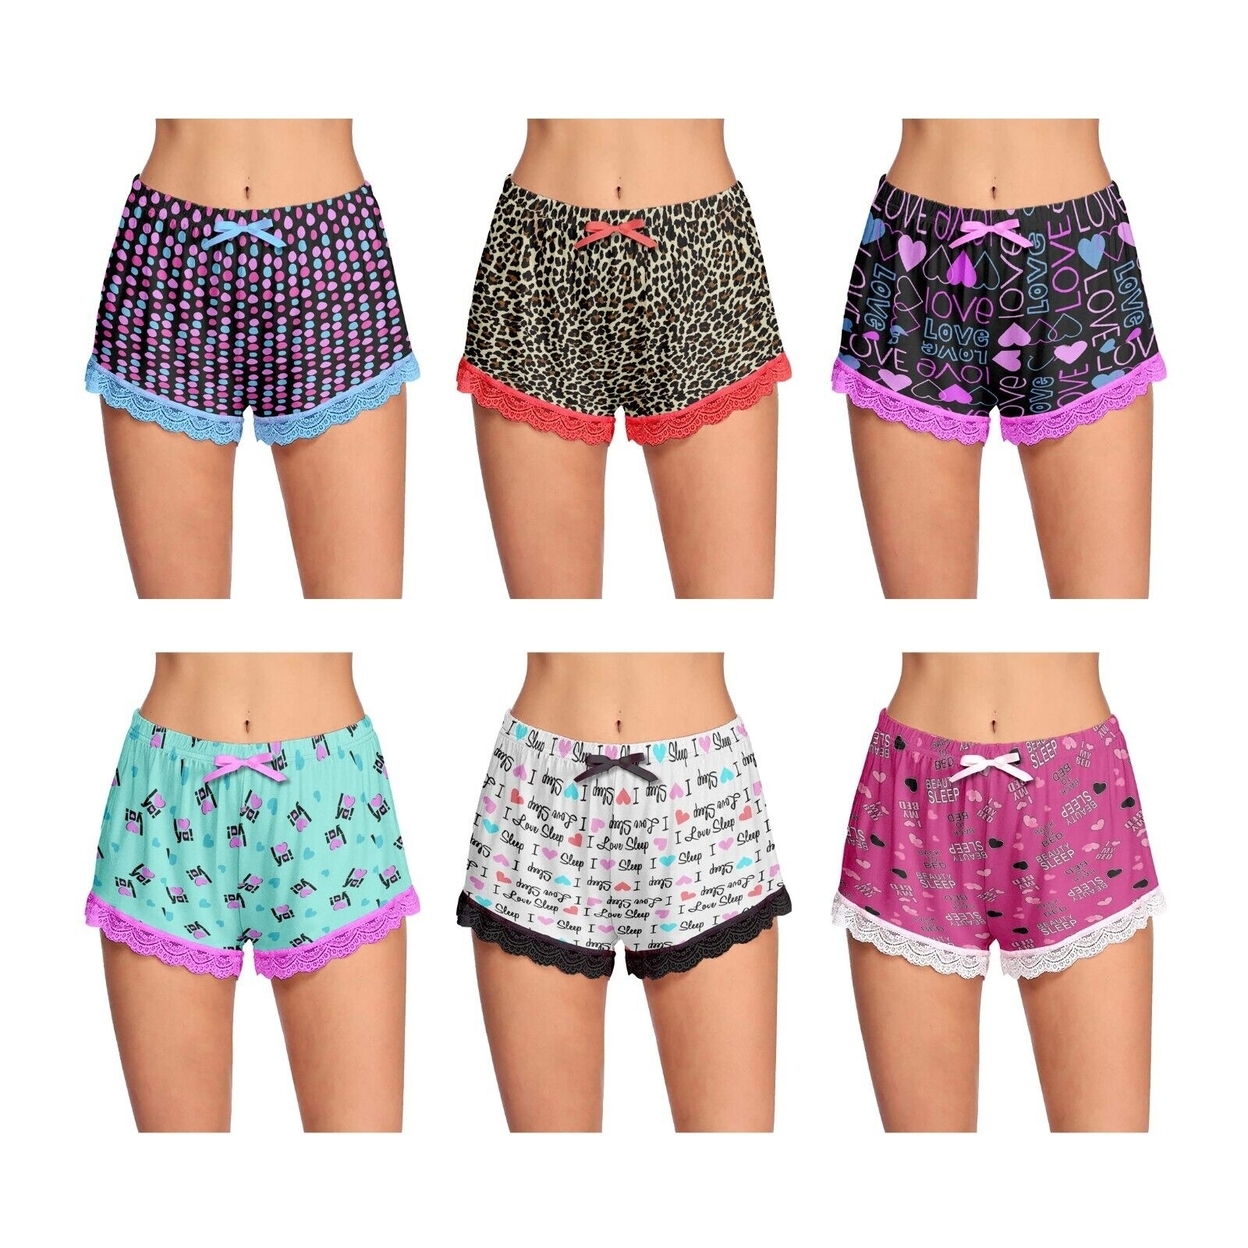 Multi-Pack: Women's Ultra-Soft Cozy Fun Printed Lace Trim Pajama Lounge Shorts - 2-pack, Small, Shapes